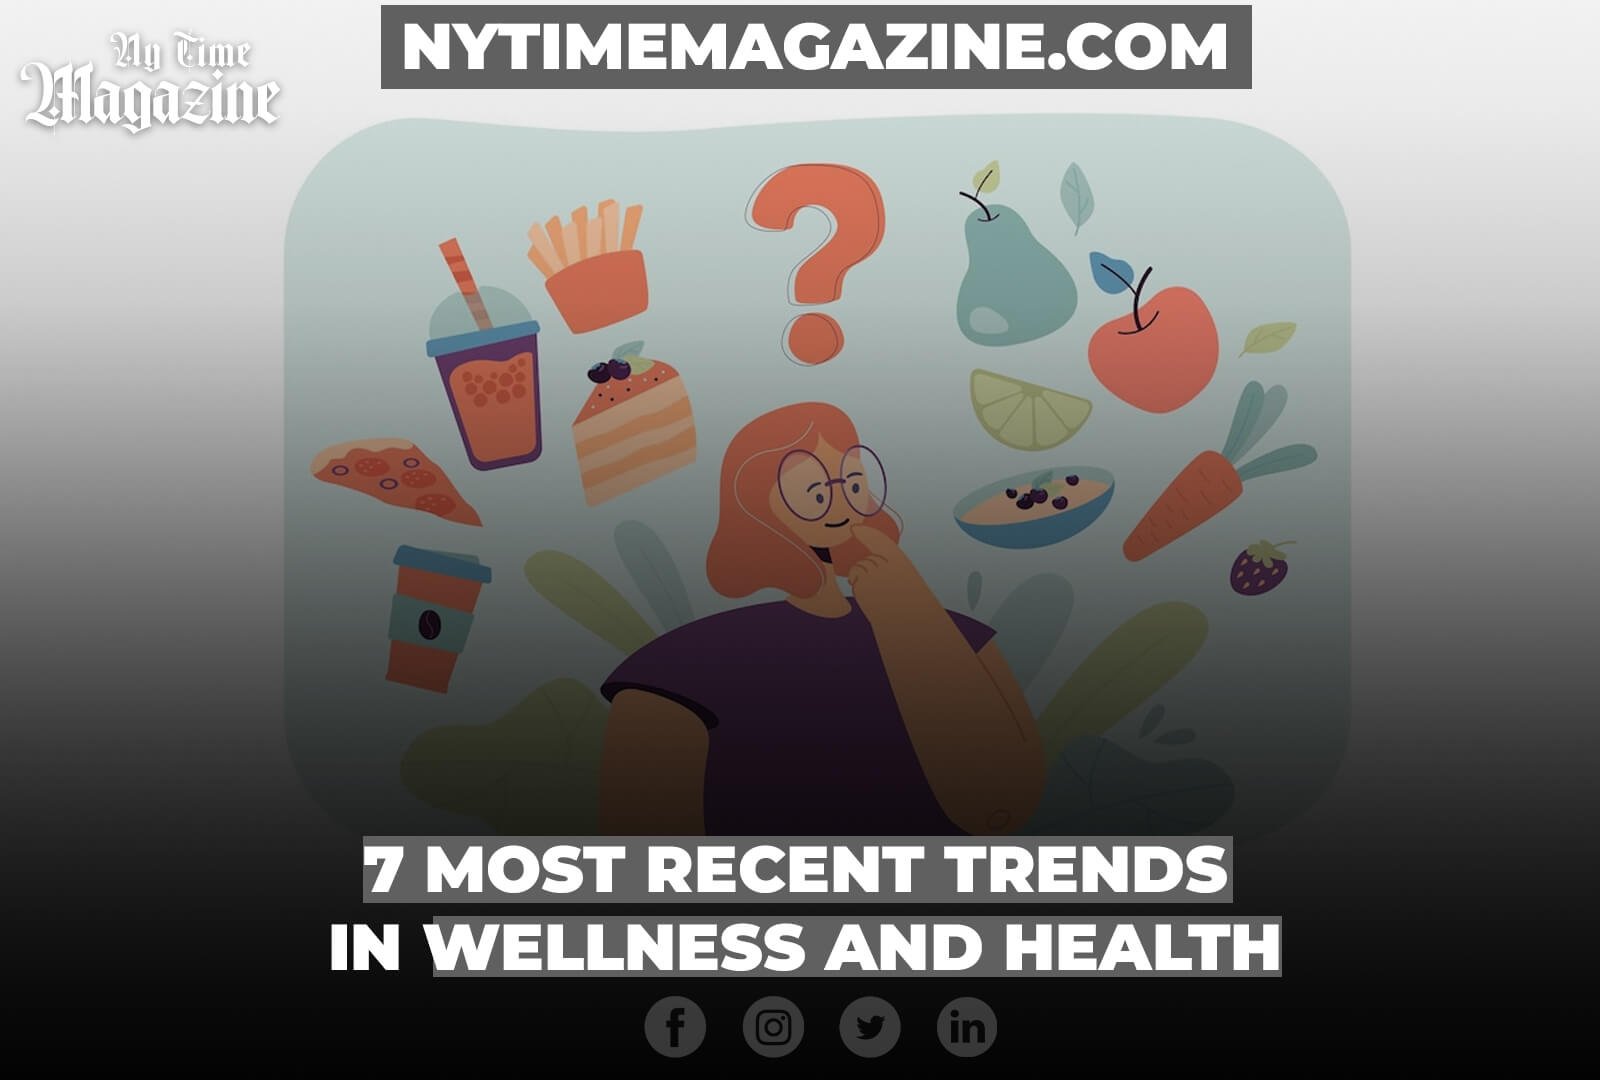 7 Most Recent Trends in Wellness and Health